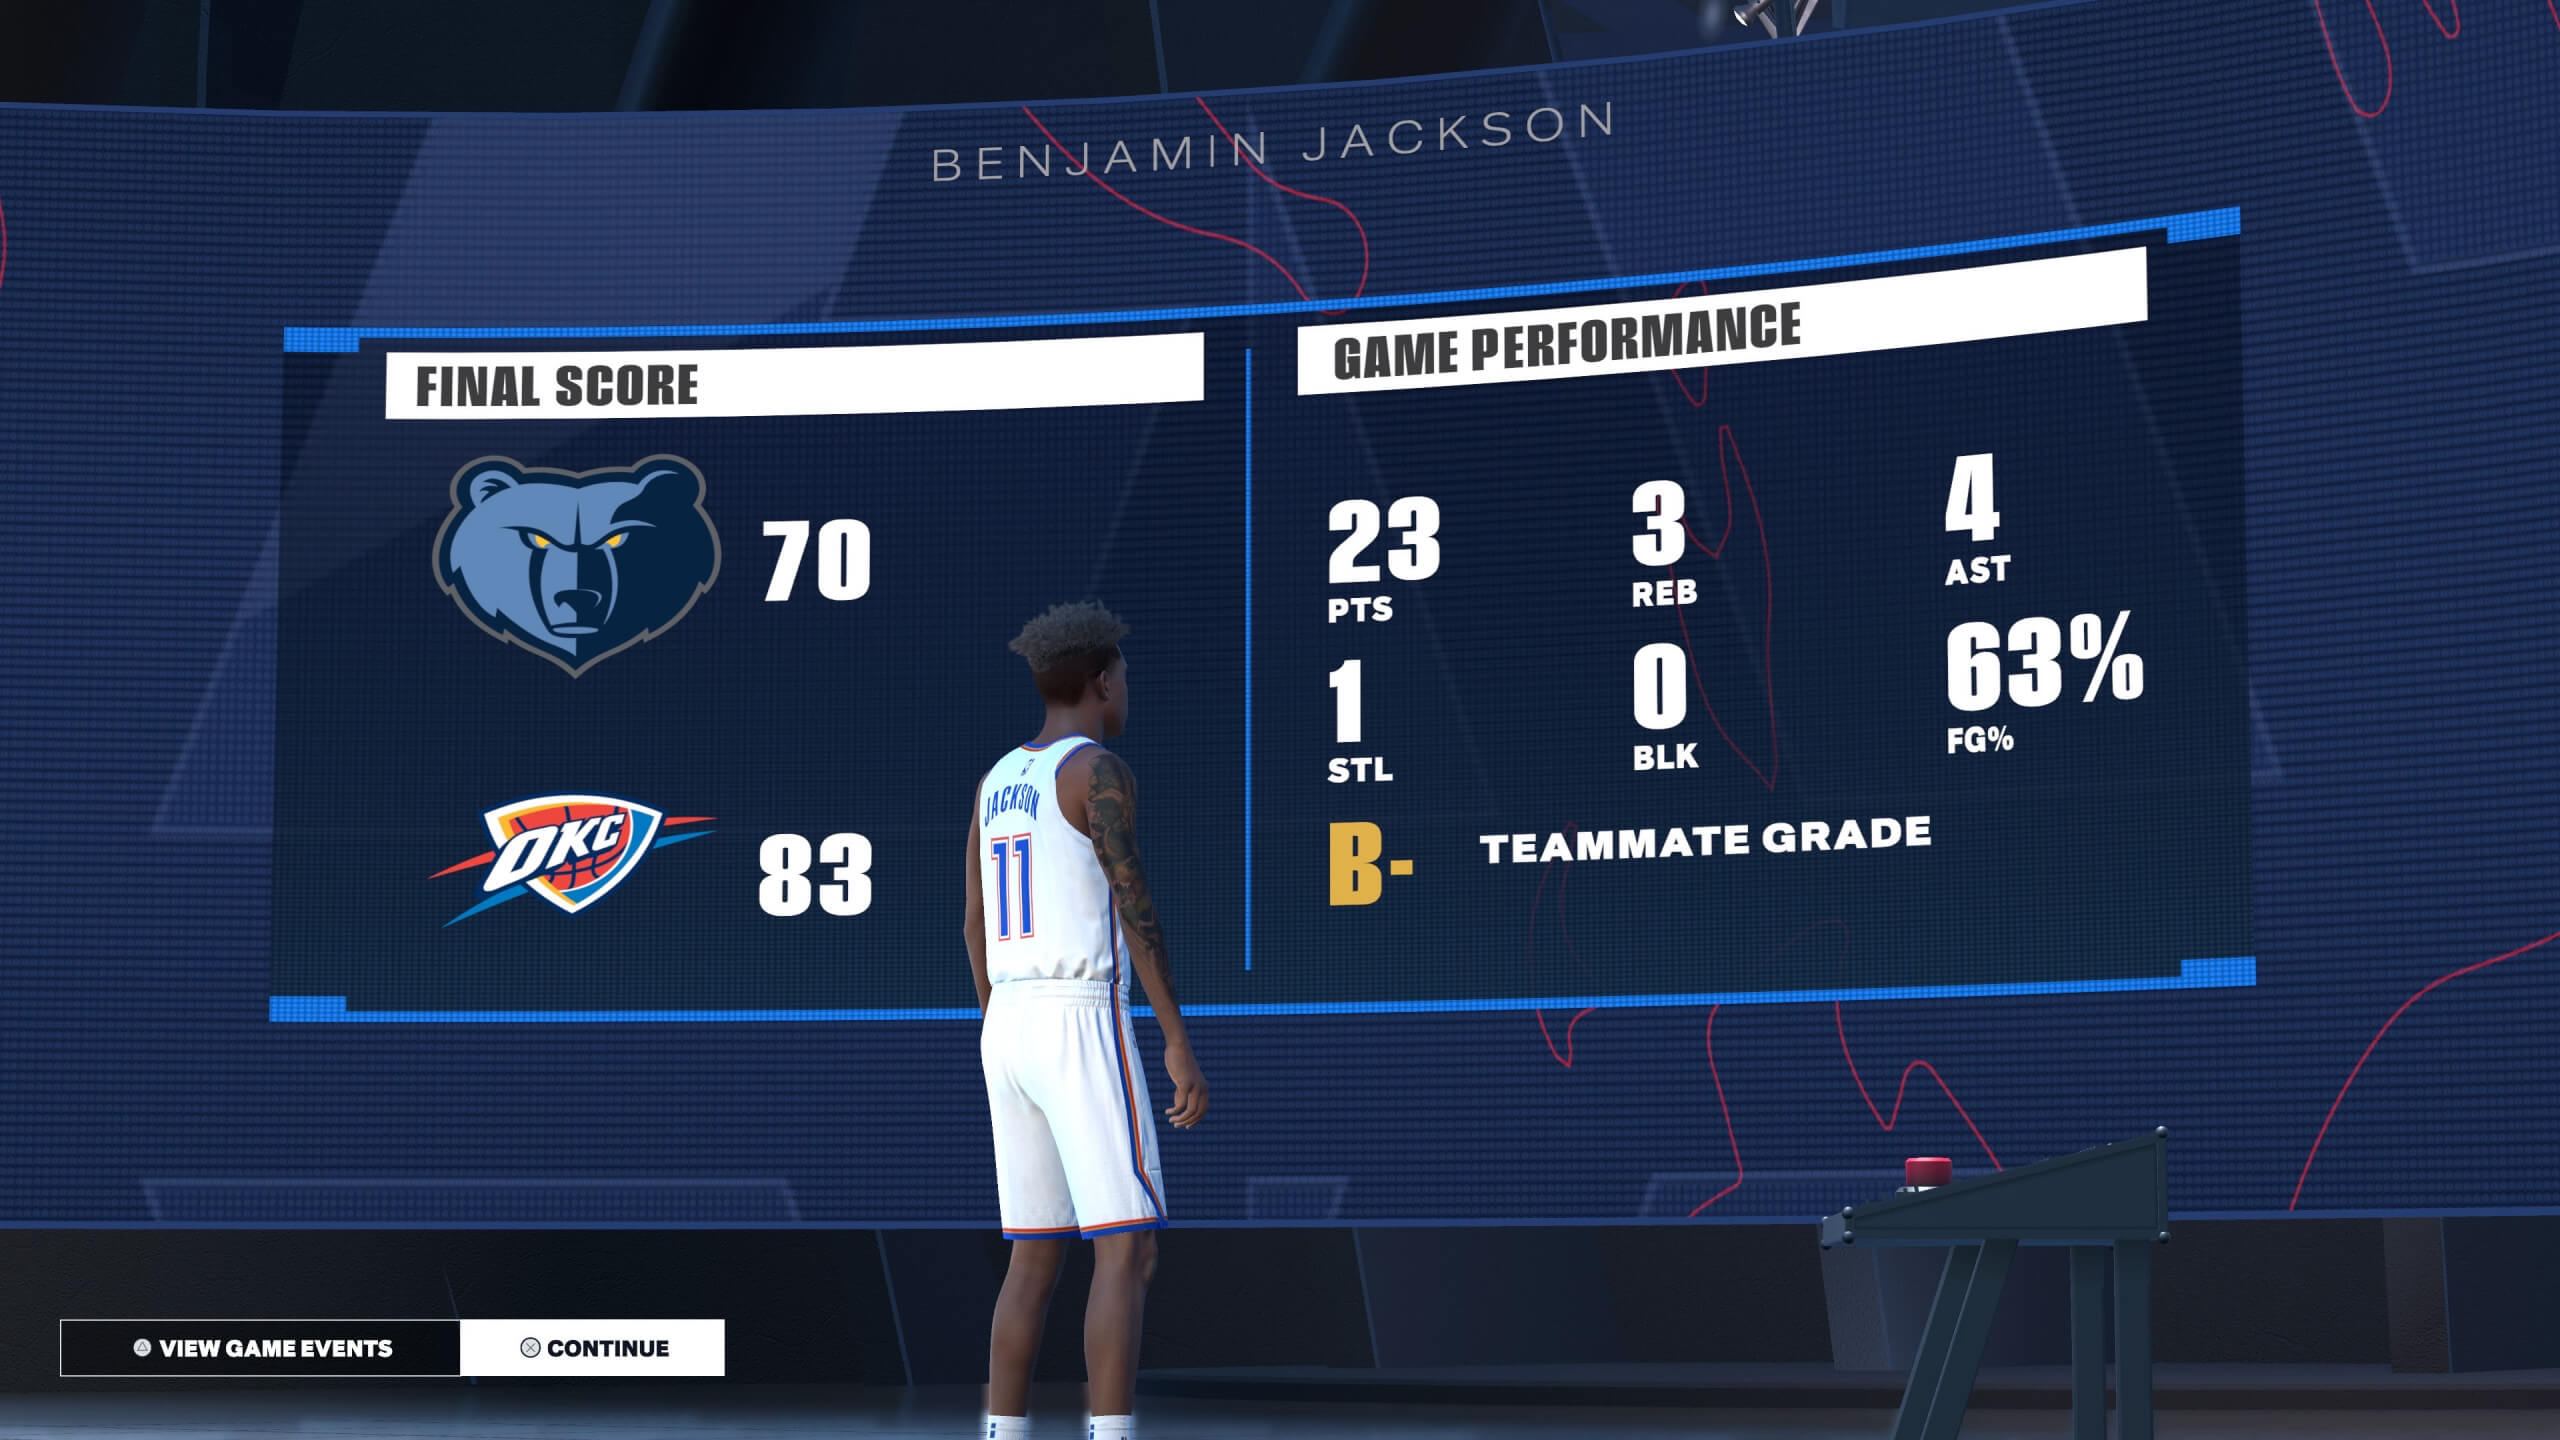 This photograph shows the name Ben Jackson and the points, assists and throw percentage in the game of OKC Thunder vs the Grizzlies 